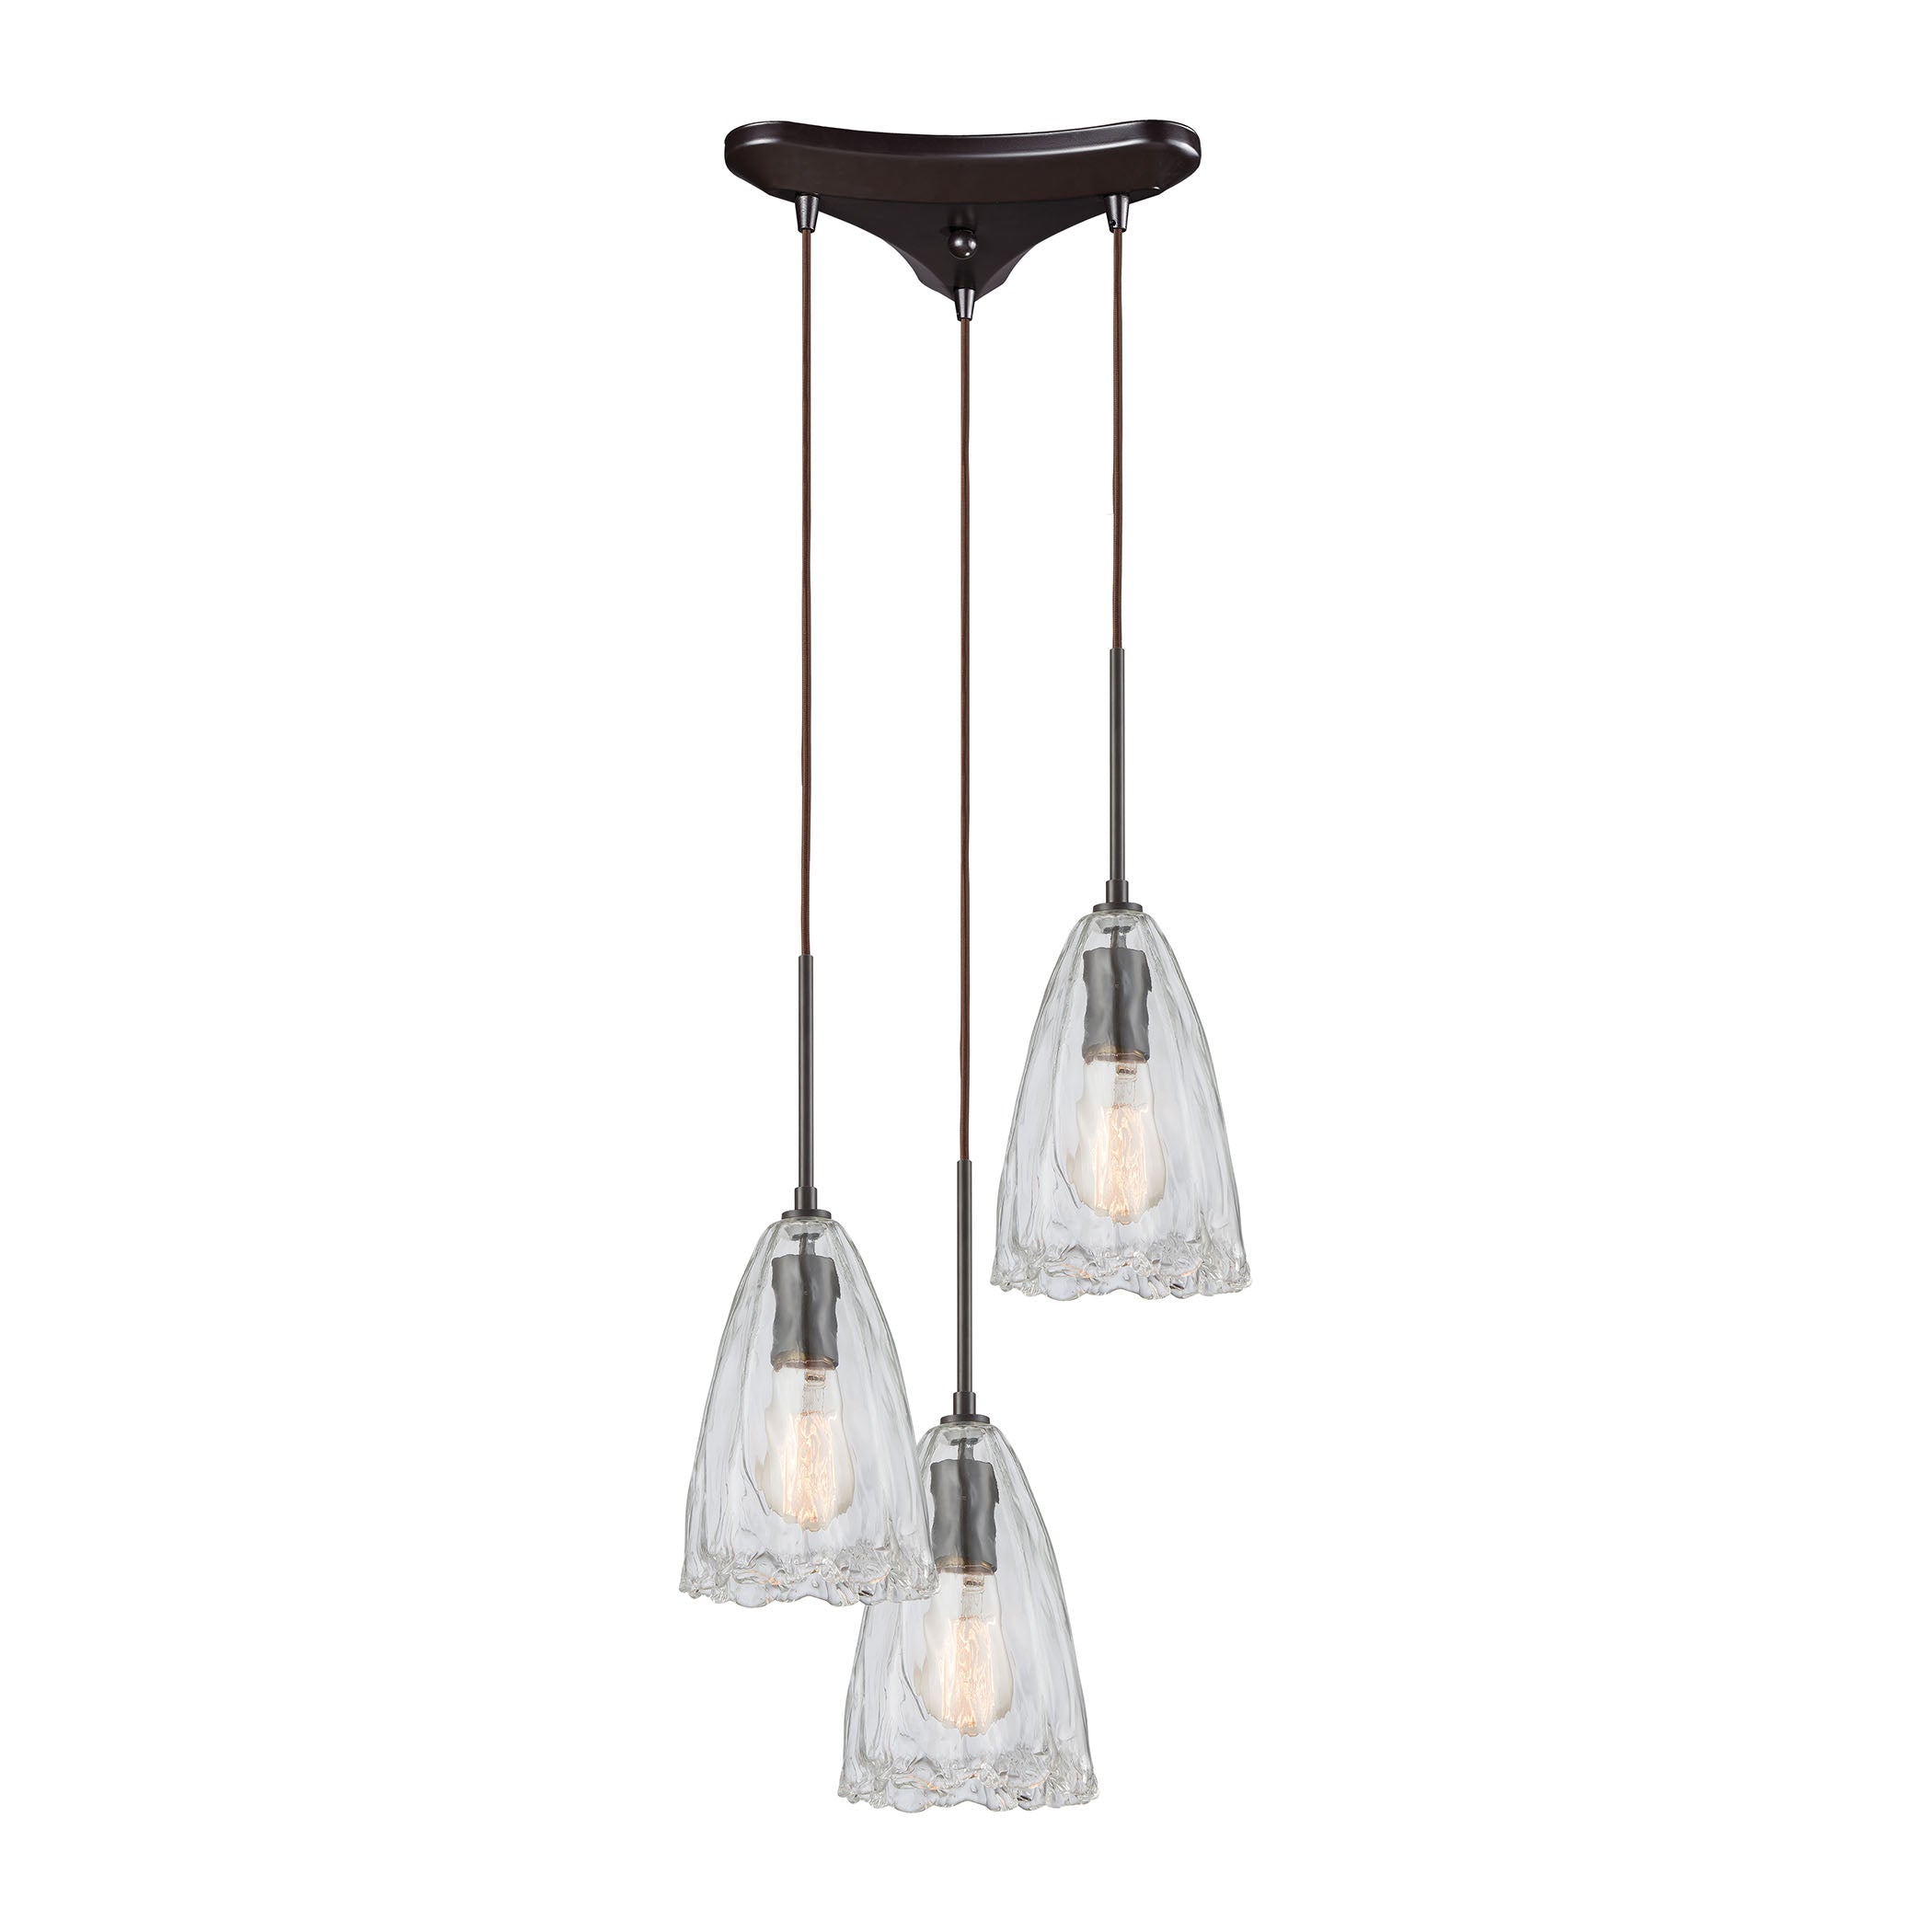 ELK Lighting 10459/3 Hand Formed Glass 3-Light Triangular Pendant Fixture in Oiled Bronze with Clear Hand-formed Glass